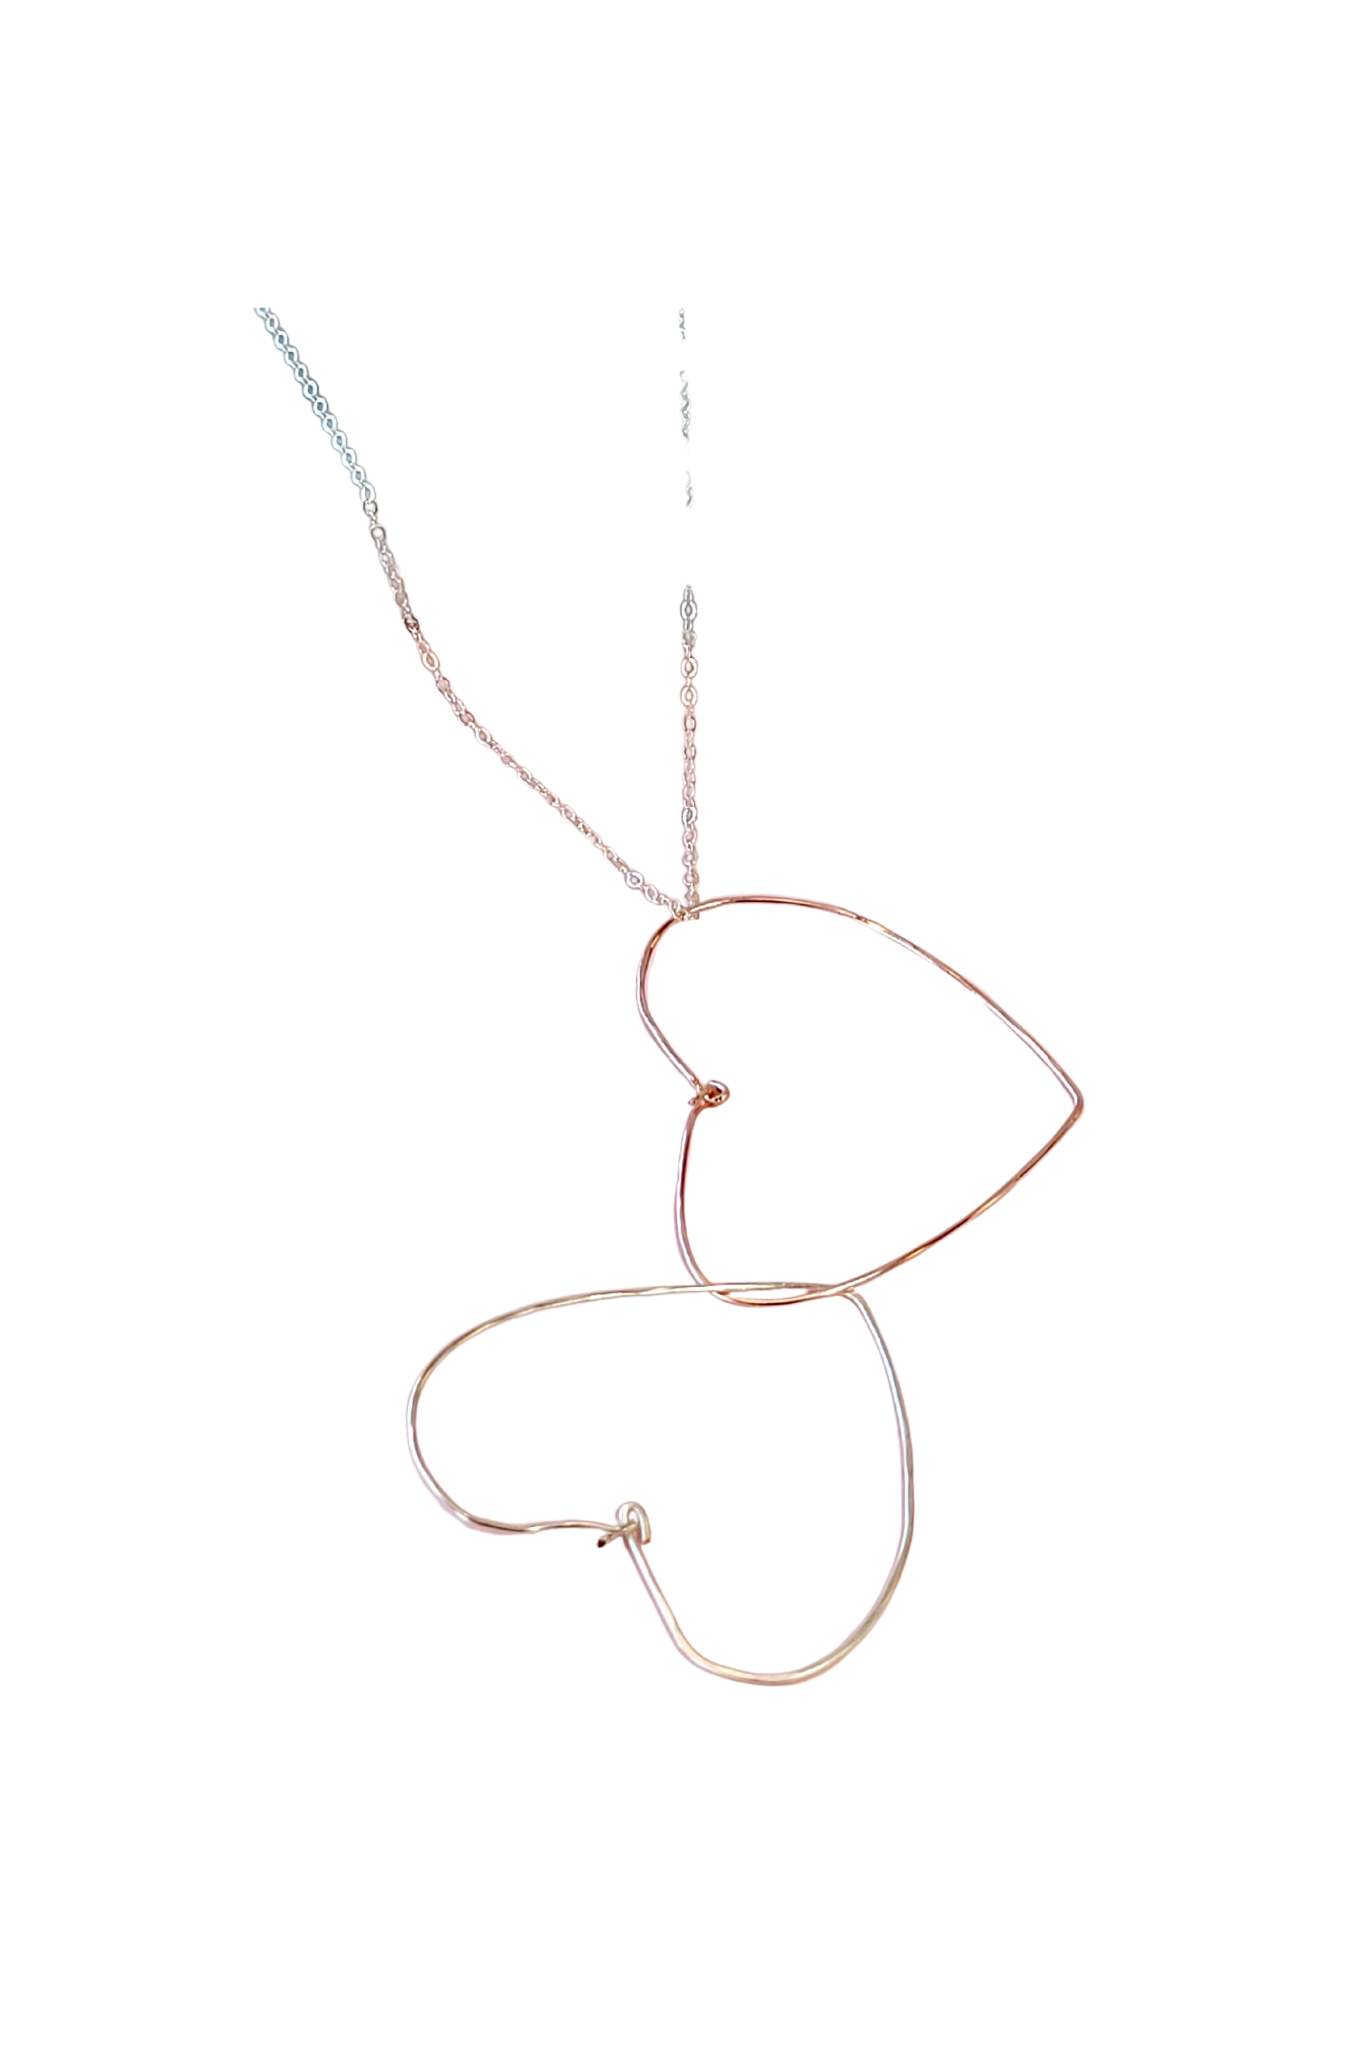 Double Drop Heart Necklace in Rose Gold and Silver